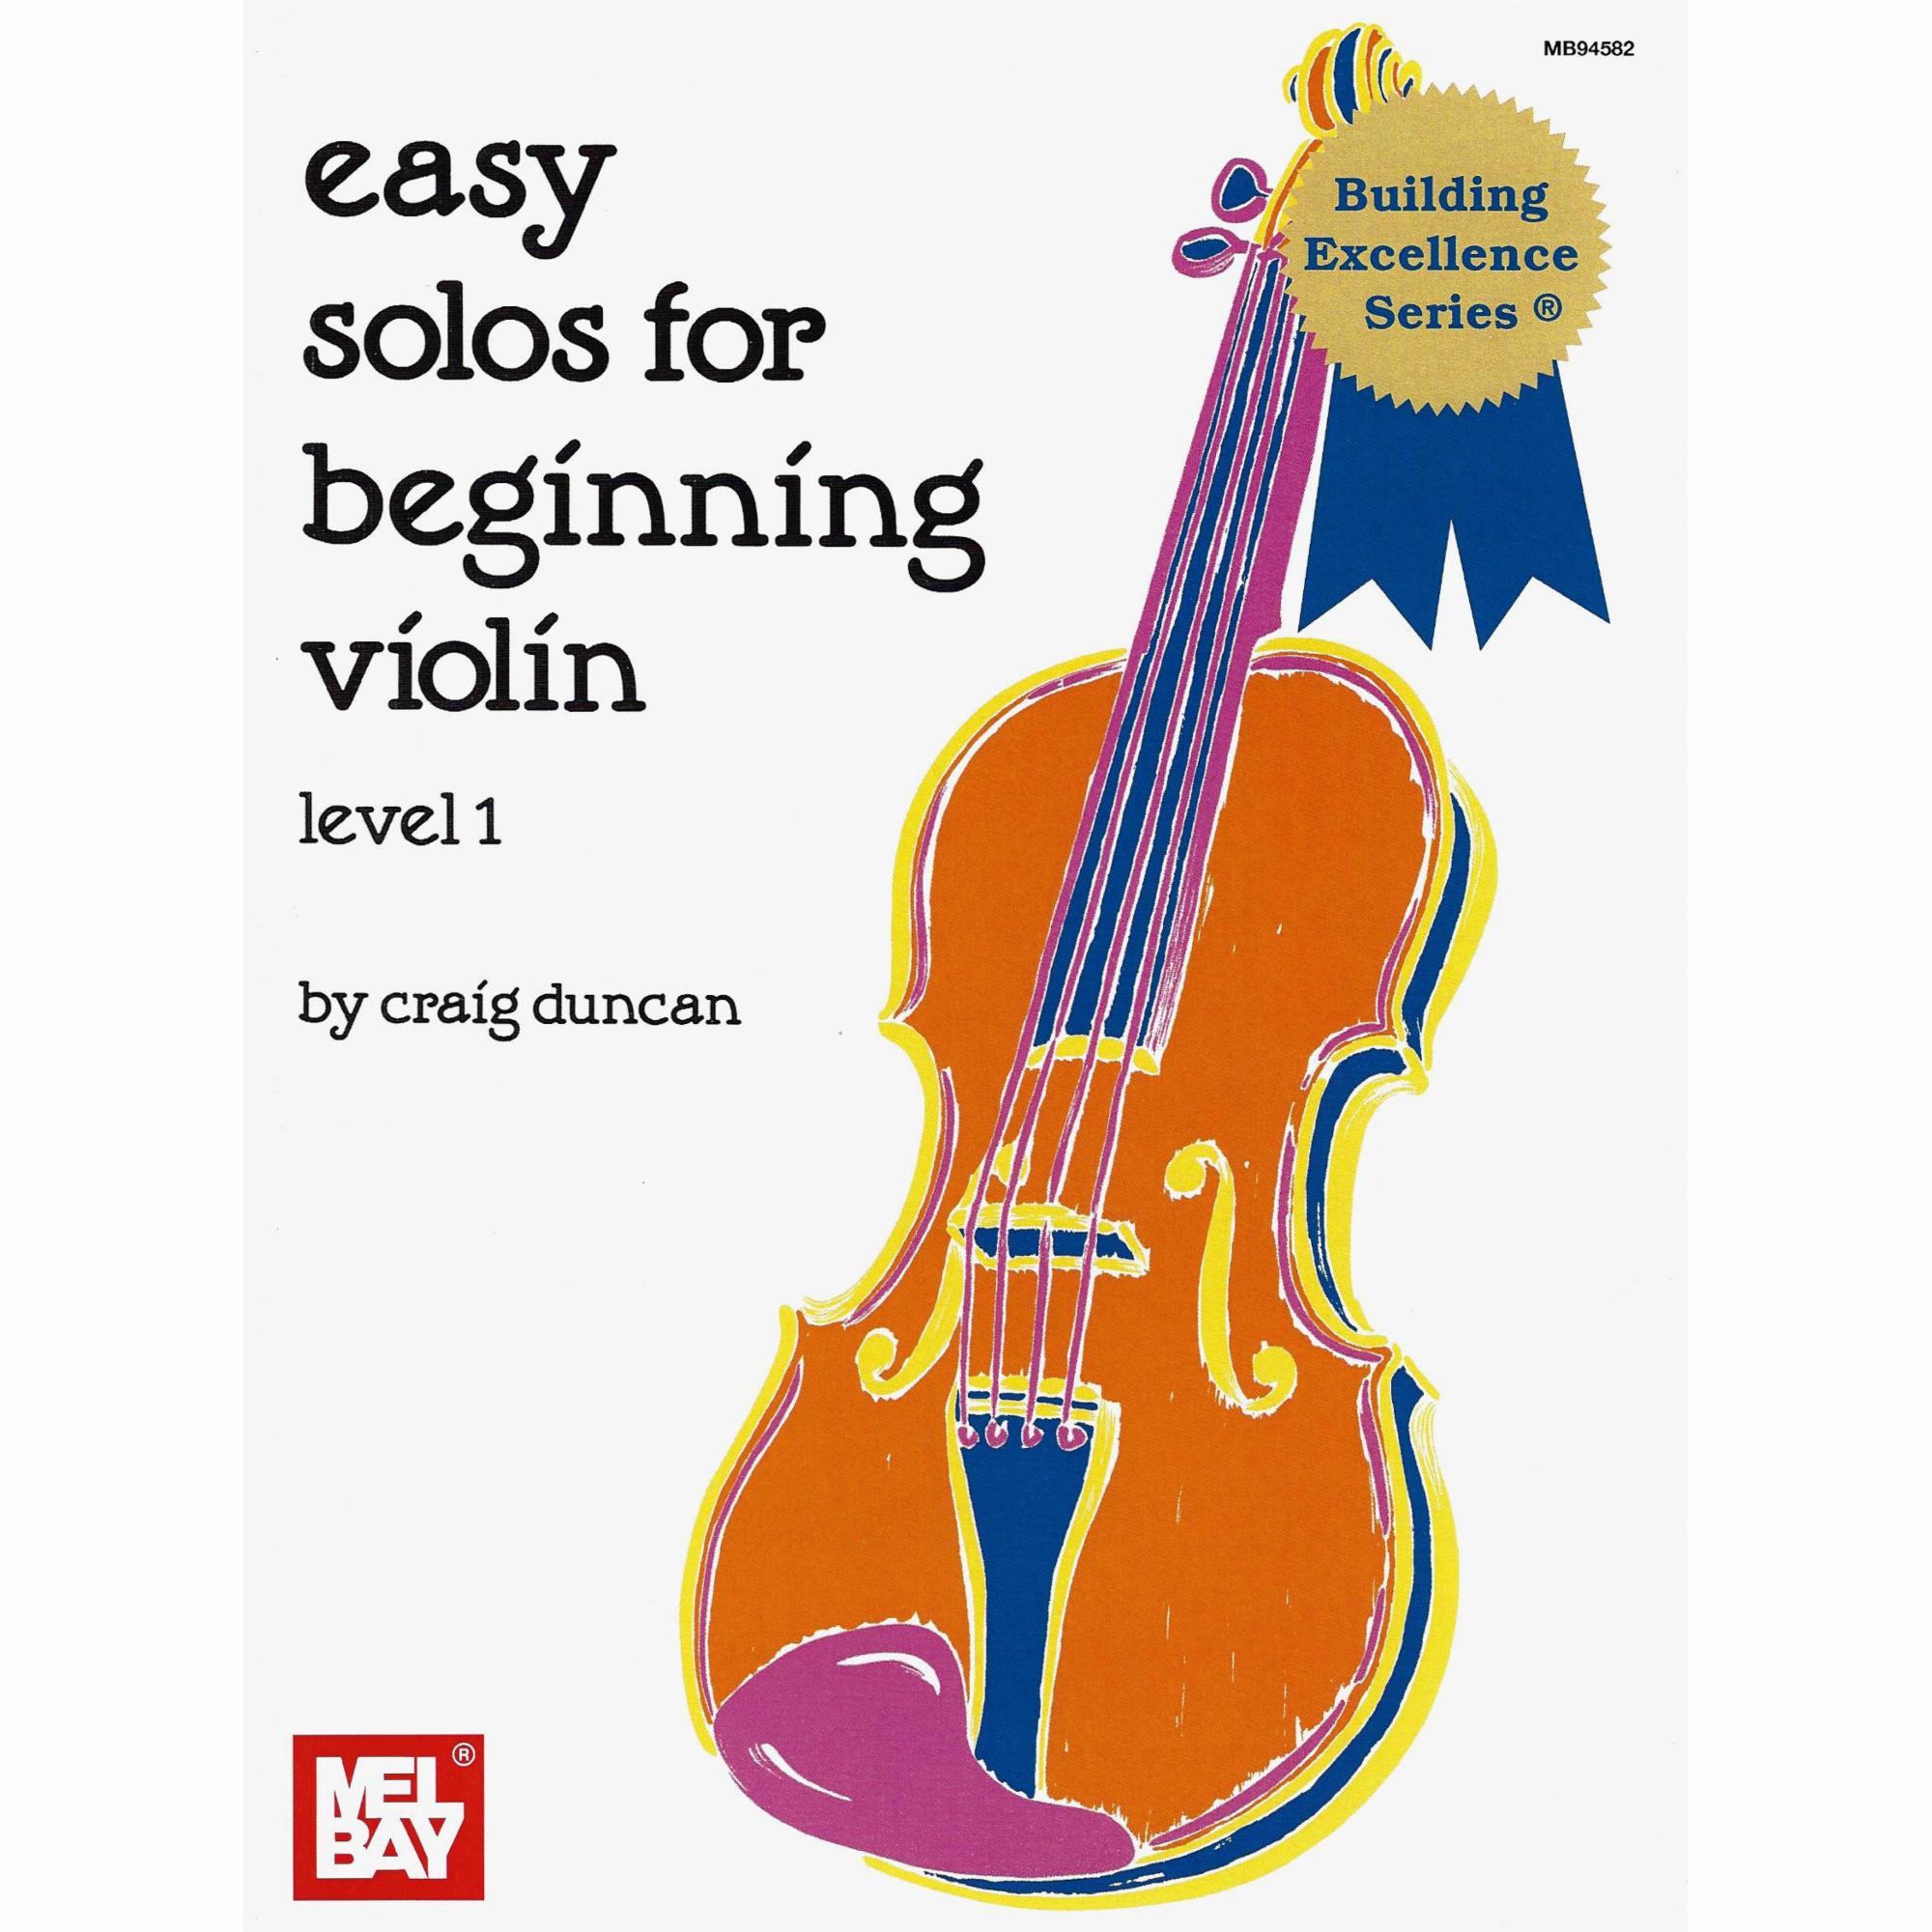 Easy Solos for Beginning Violin, Viola, or Cello and Piano